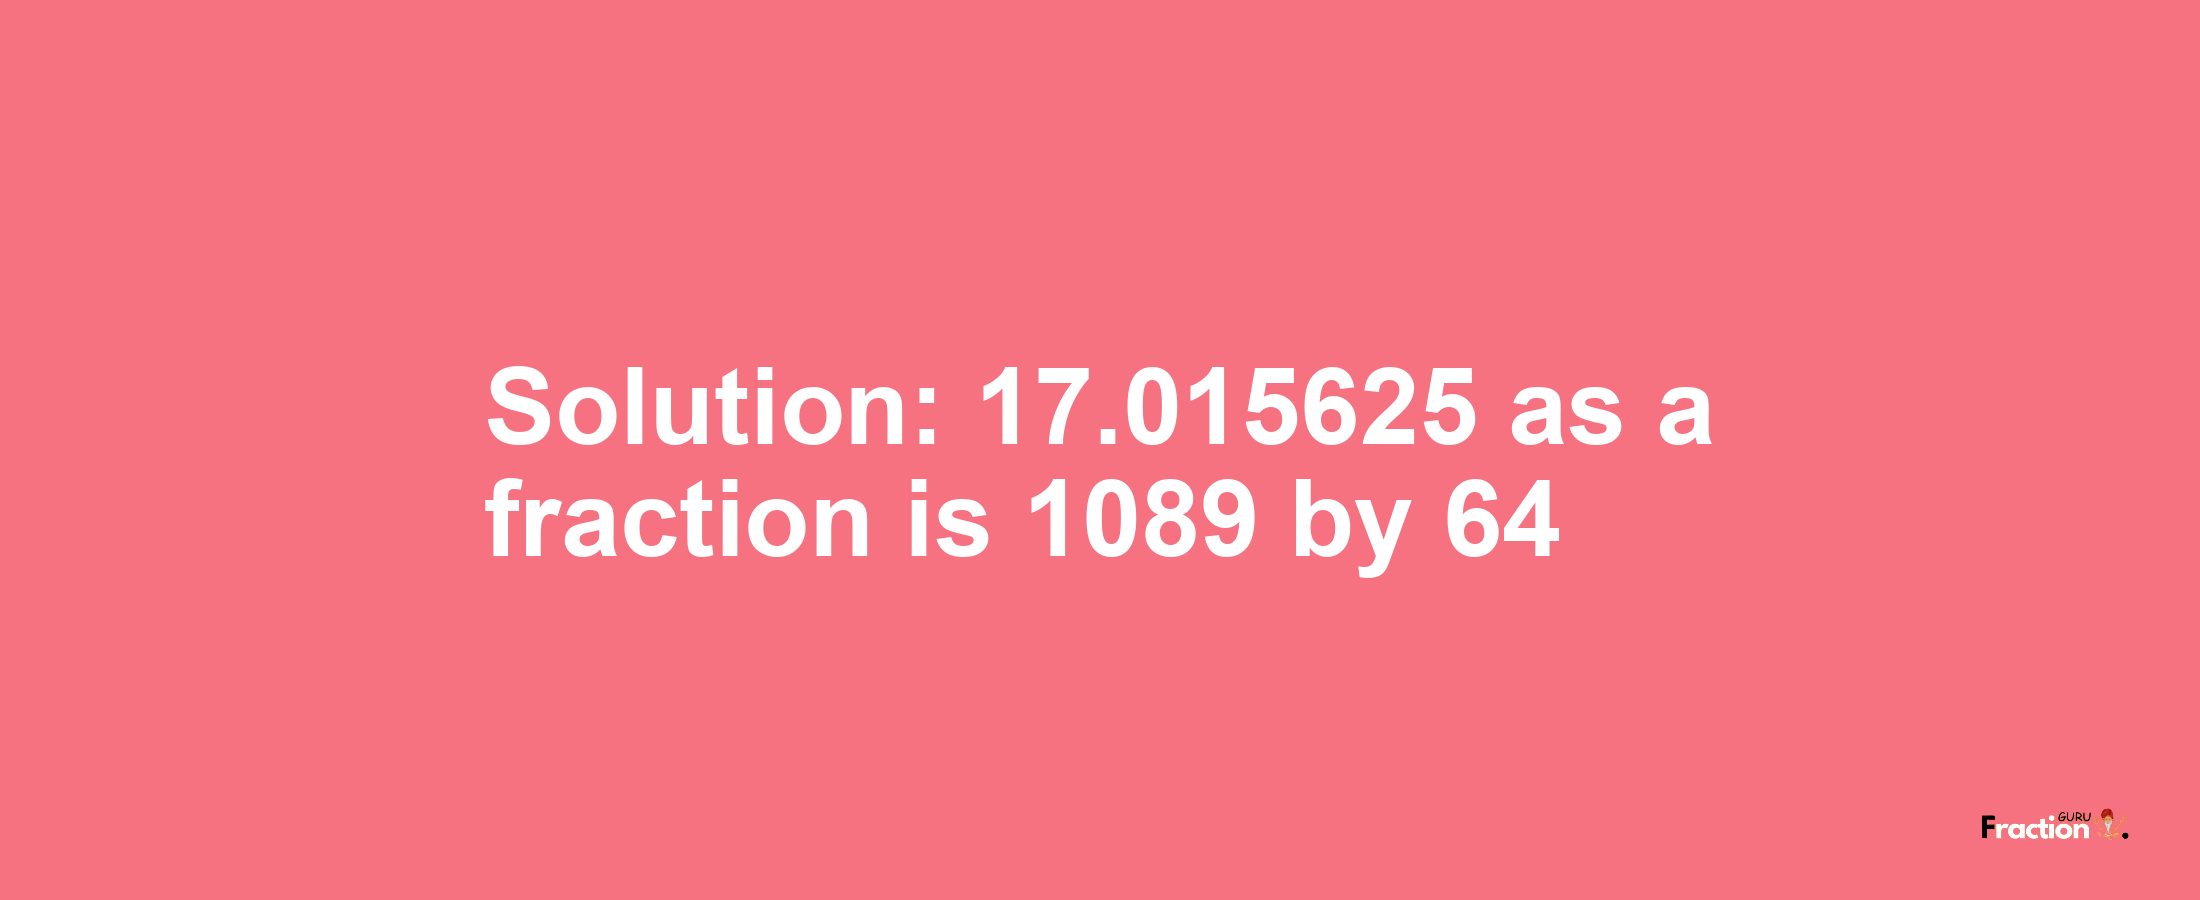 Solution:17.015625 as a fraction is 1089/64